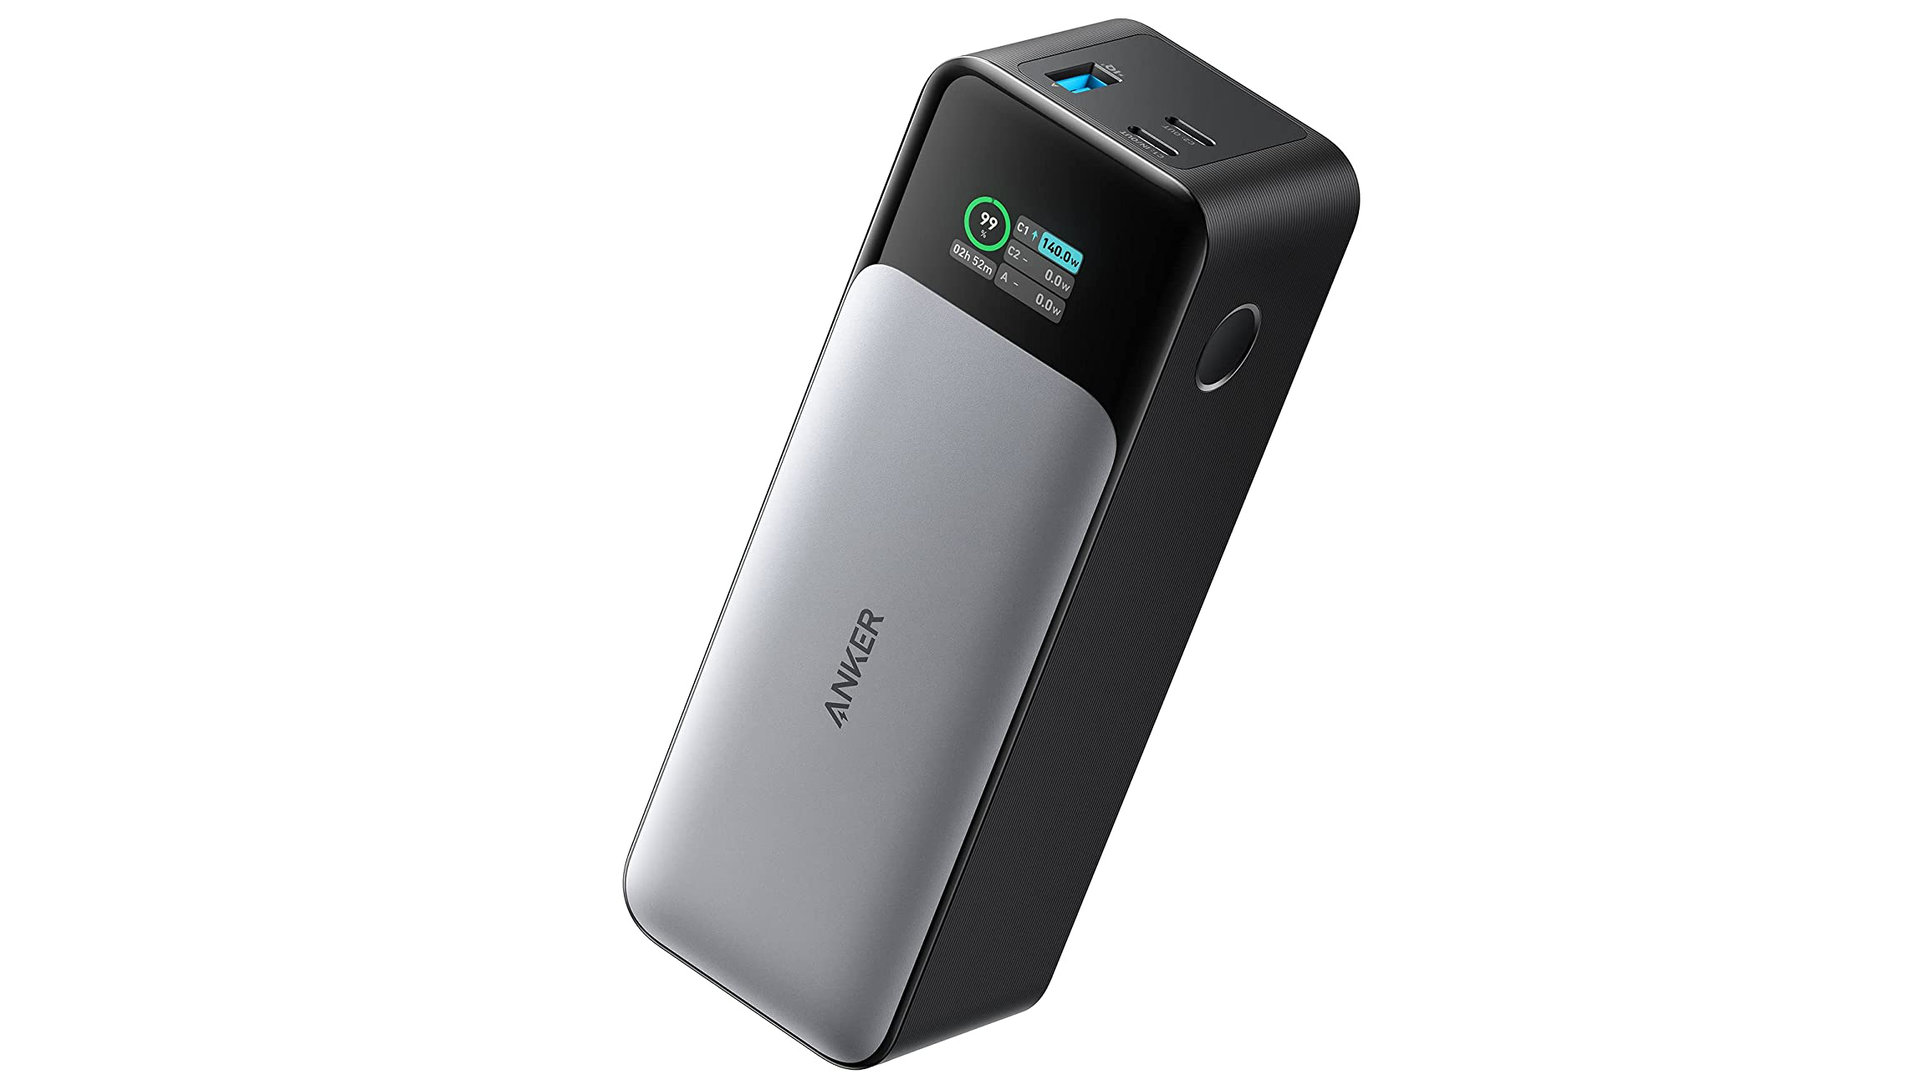 The power banks for Samsung devices if you a quick charge